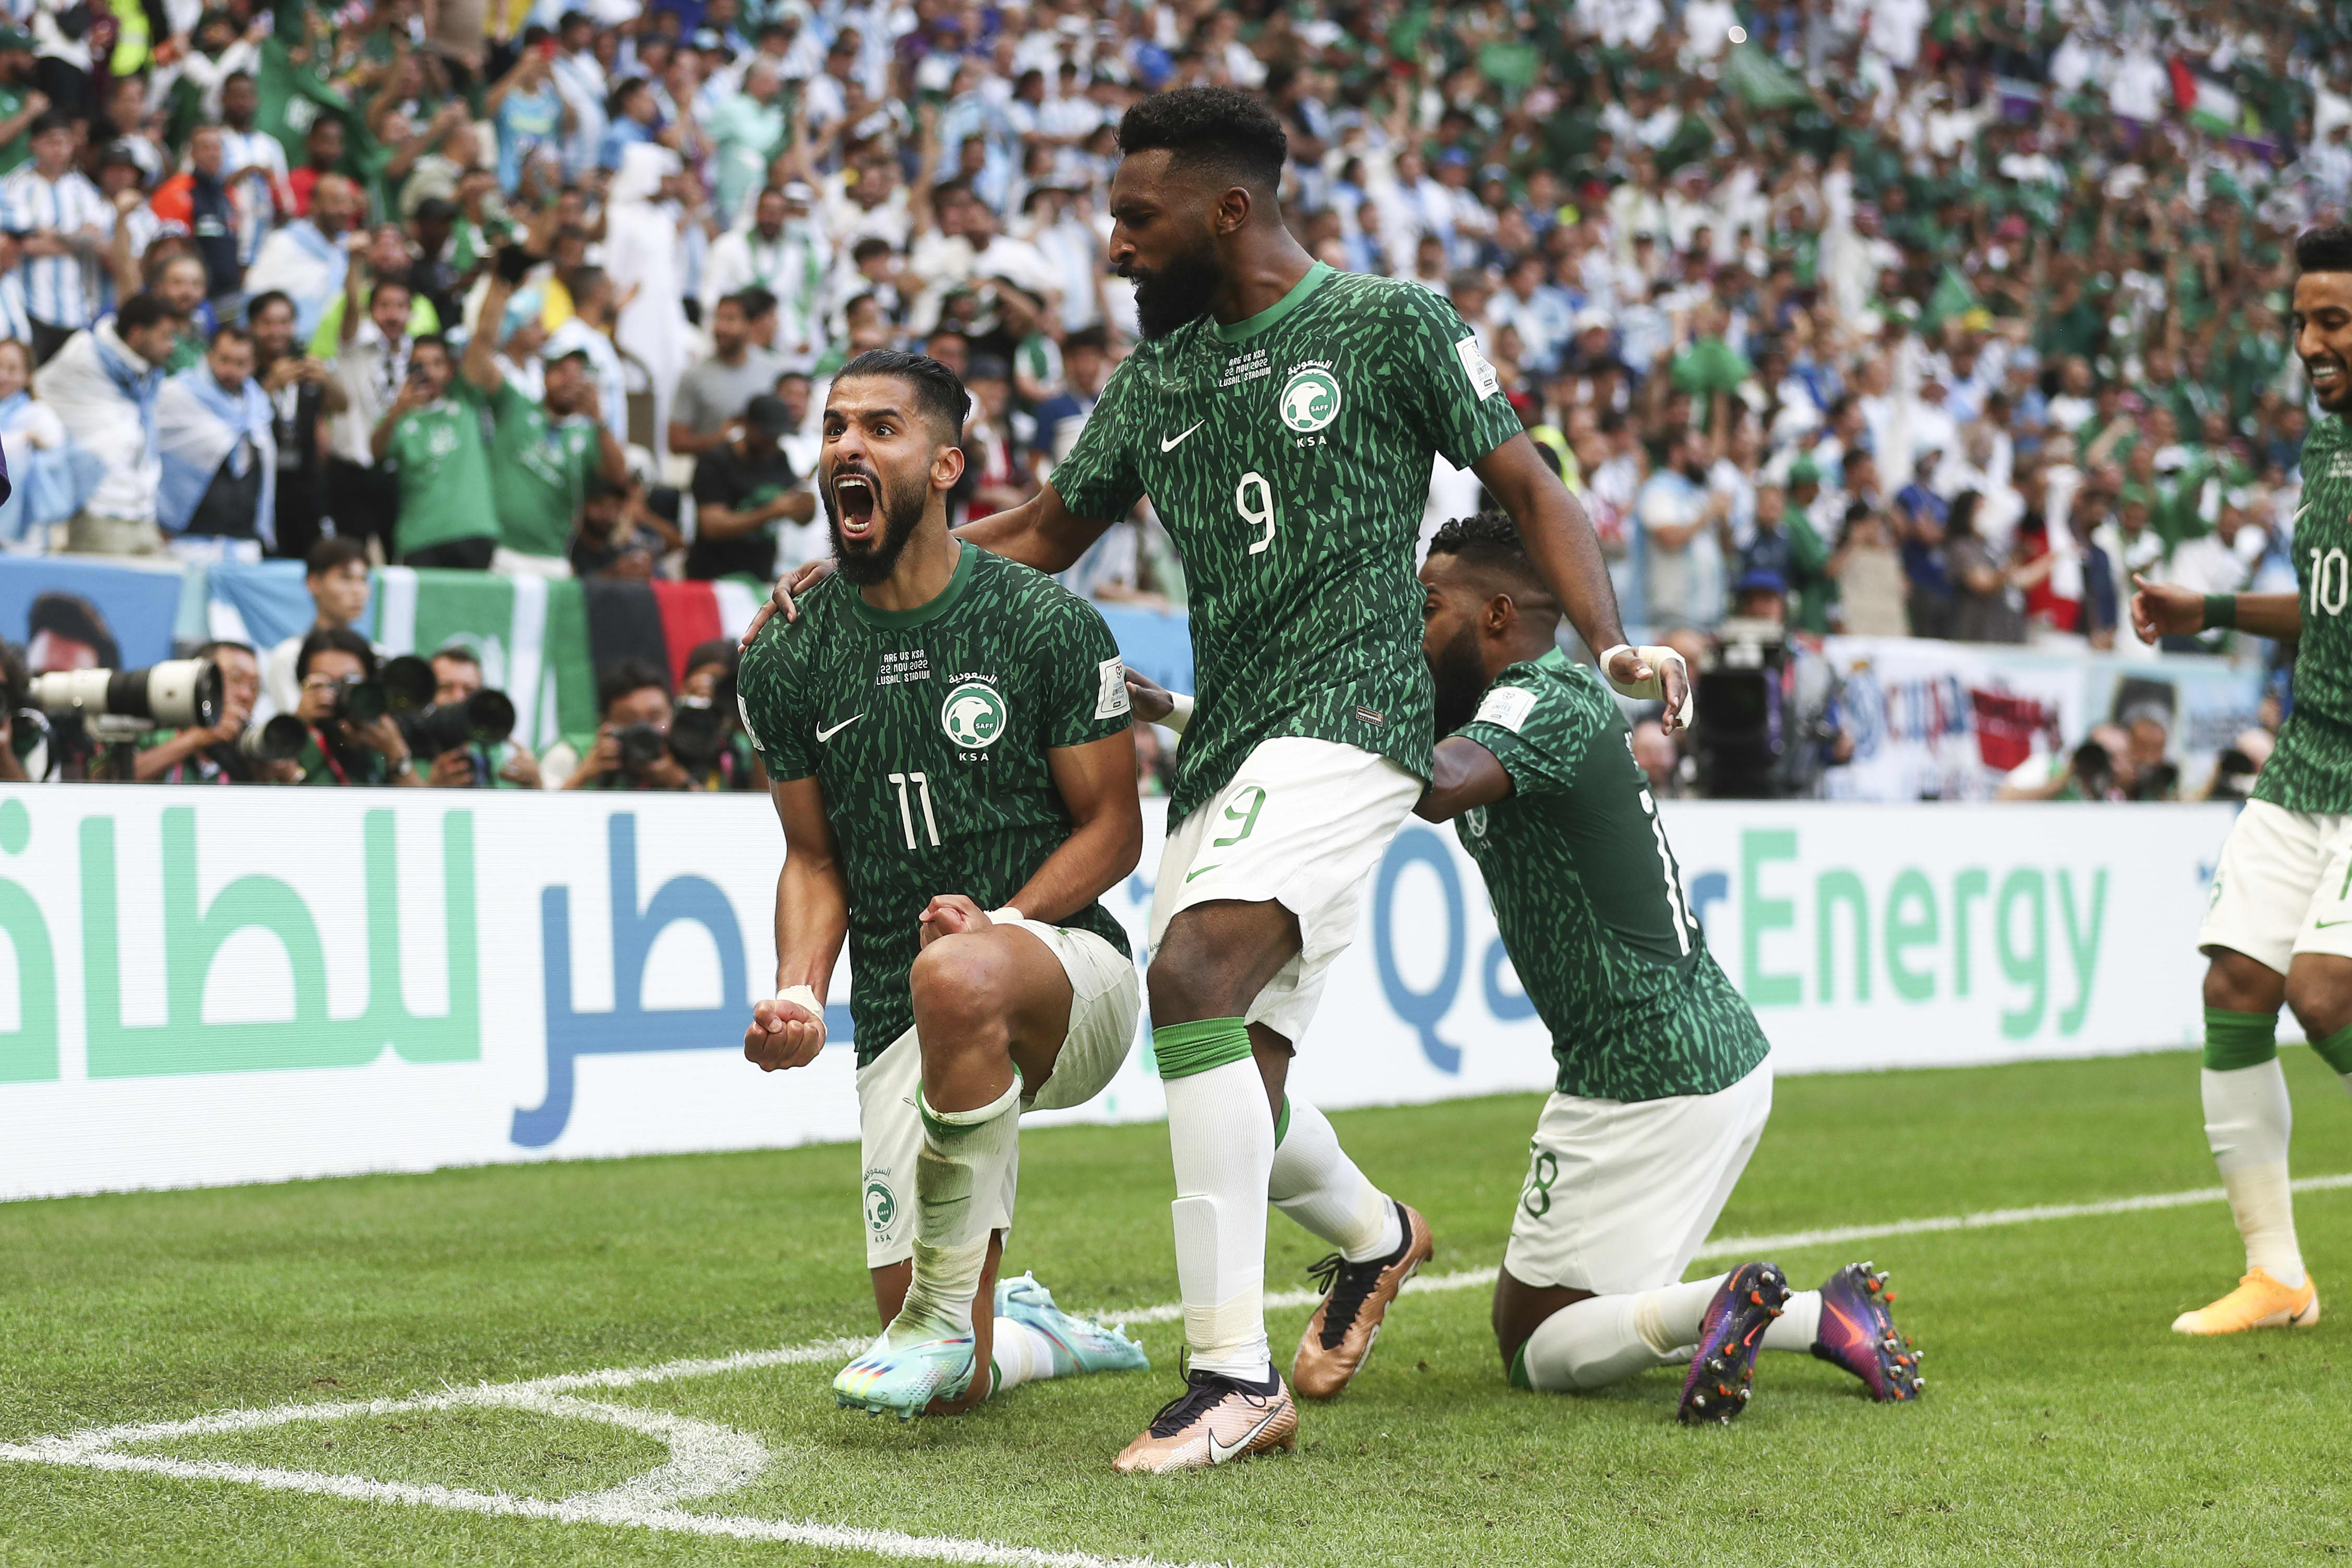 Saudi Arabia inflicts seismic World Cup shock on Argentina